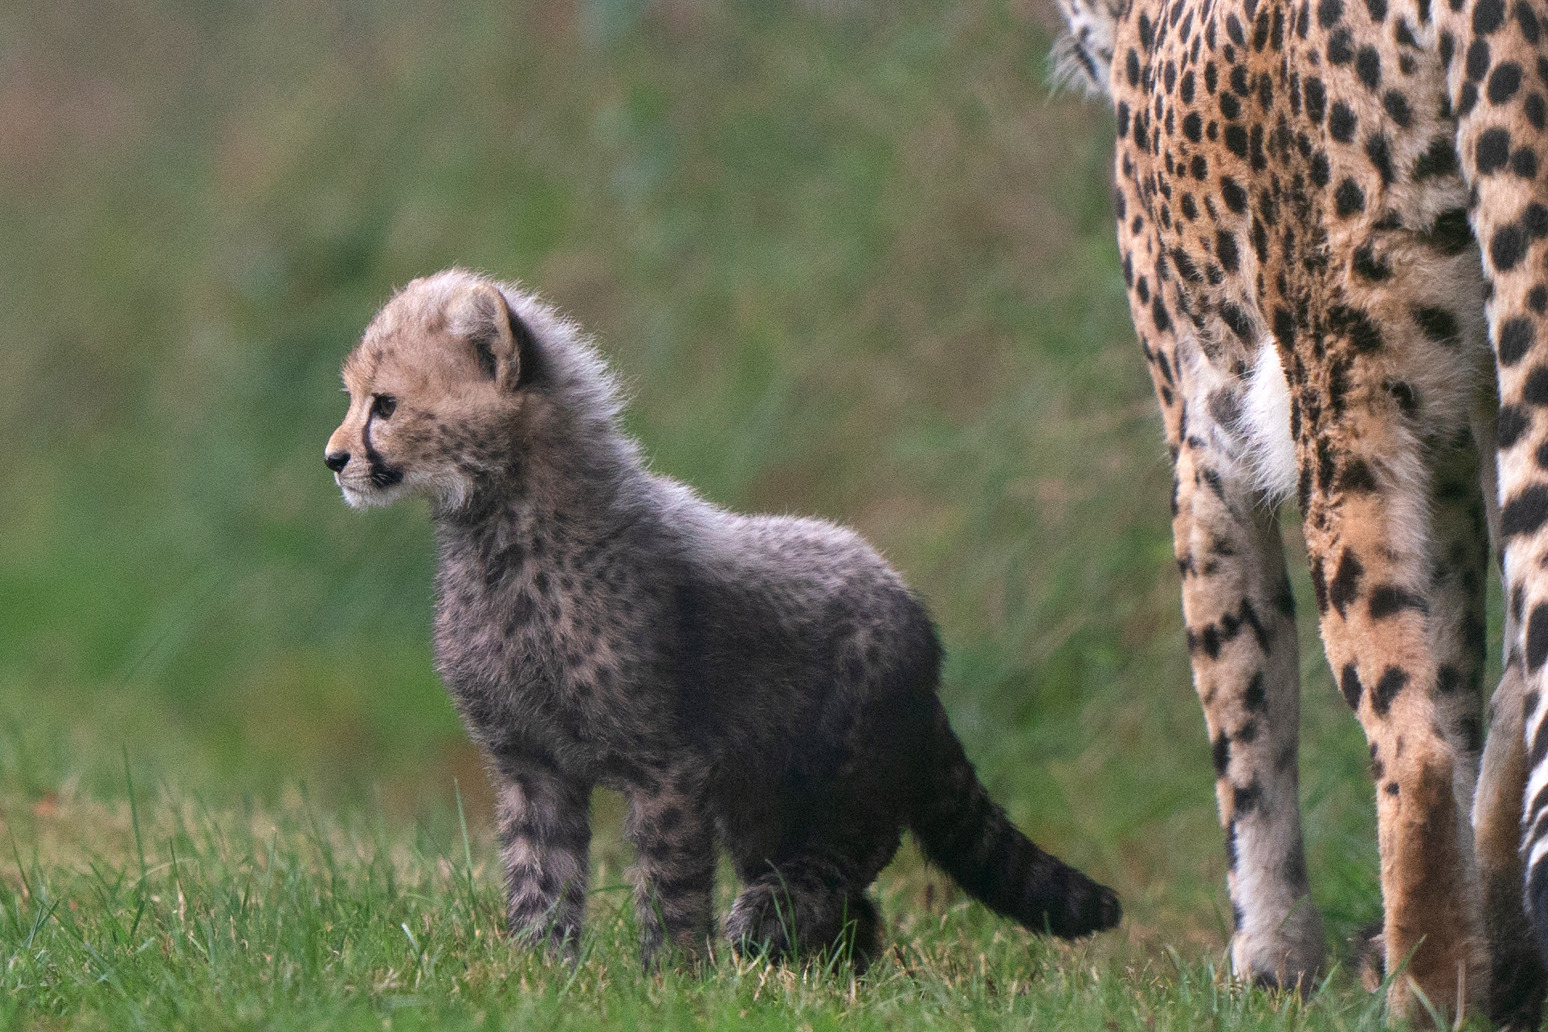 Public gets glimpse of East Anglia’s baby cheetah two years in the making 